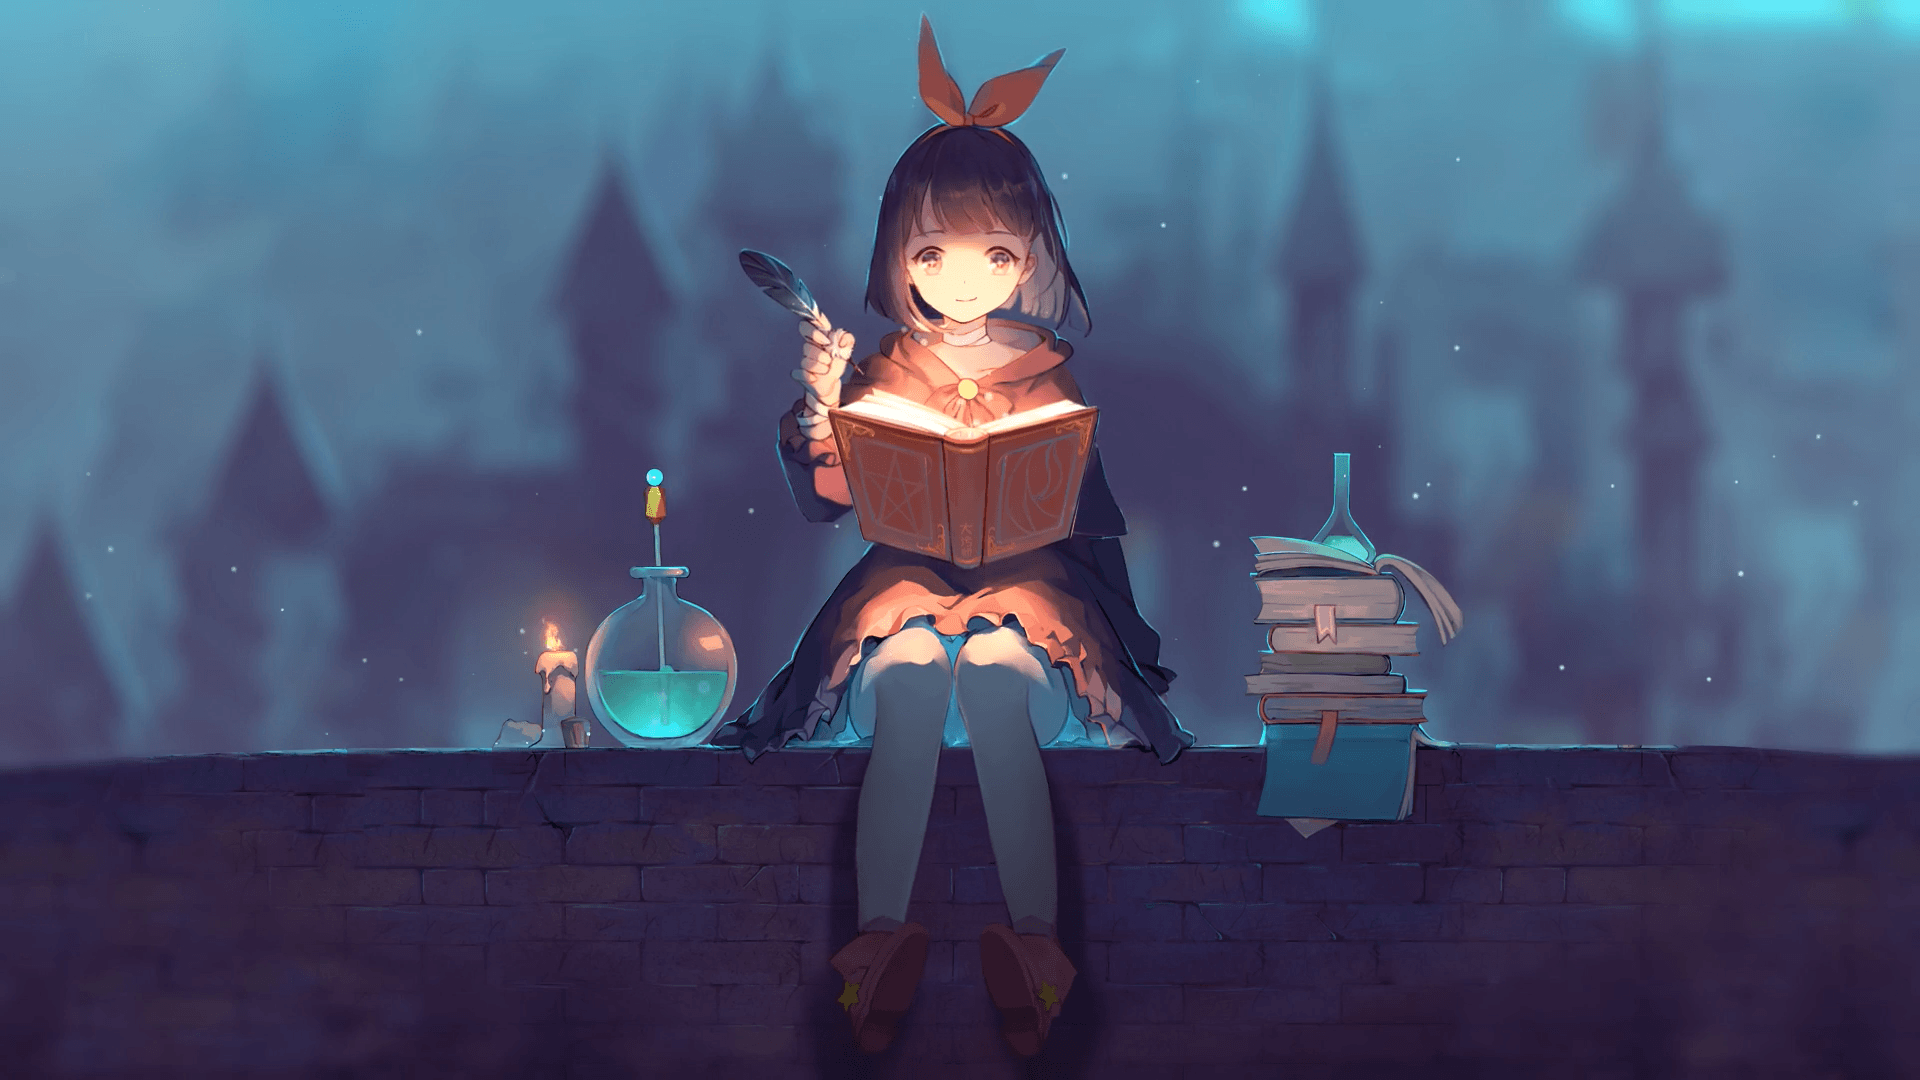 Artwork Anime Girls Books Quills Candles Chemistry Wall Fantasy Girl 1920x1080